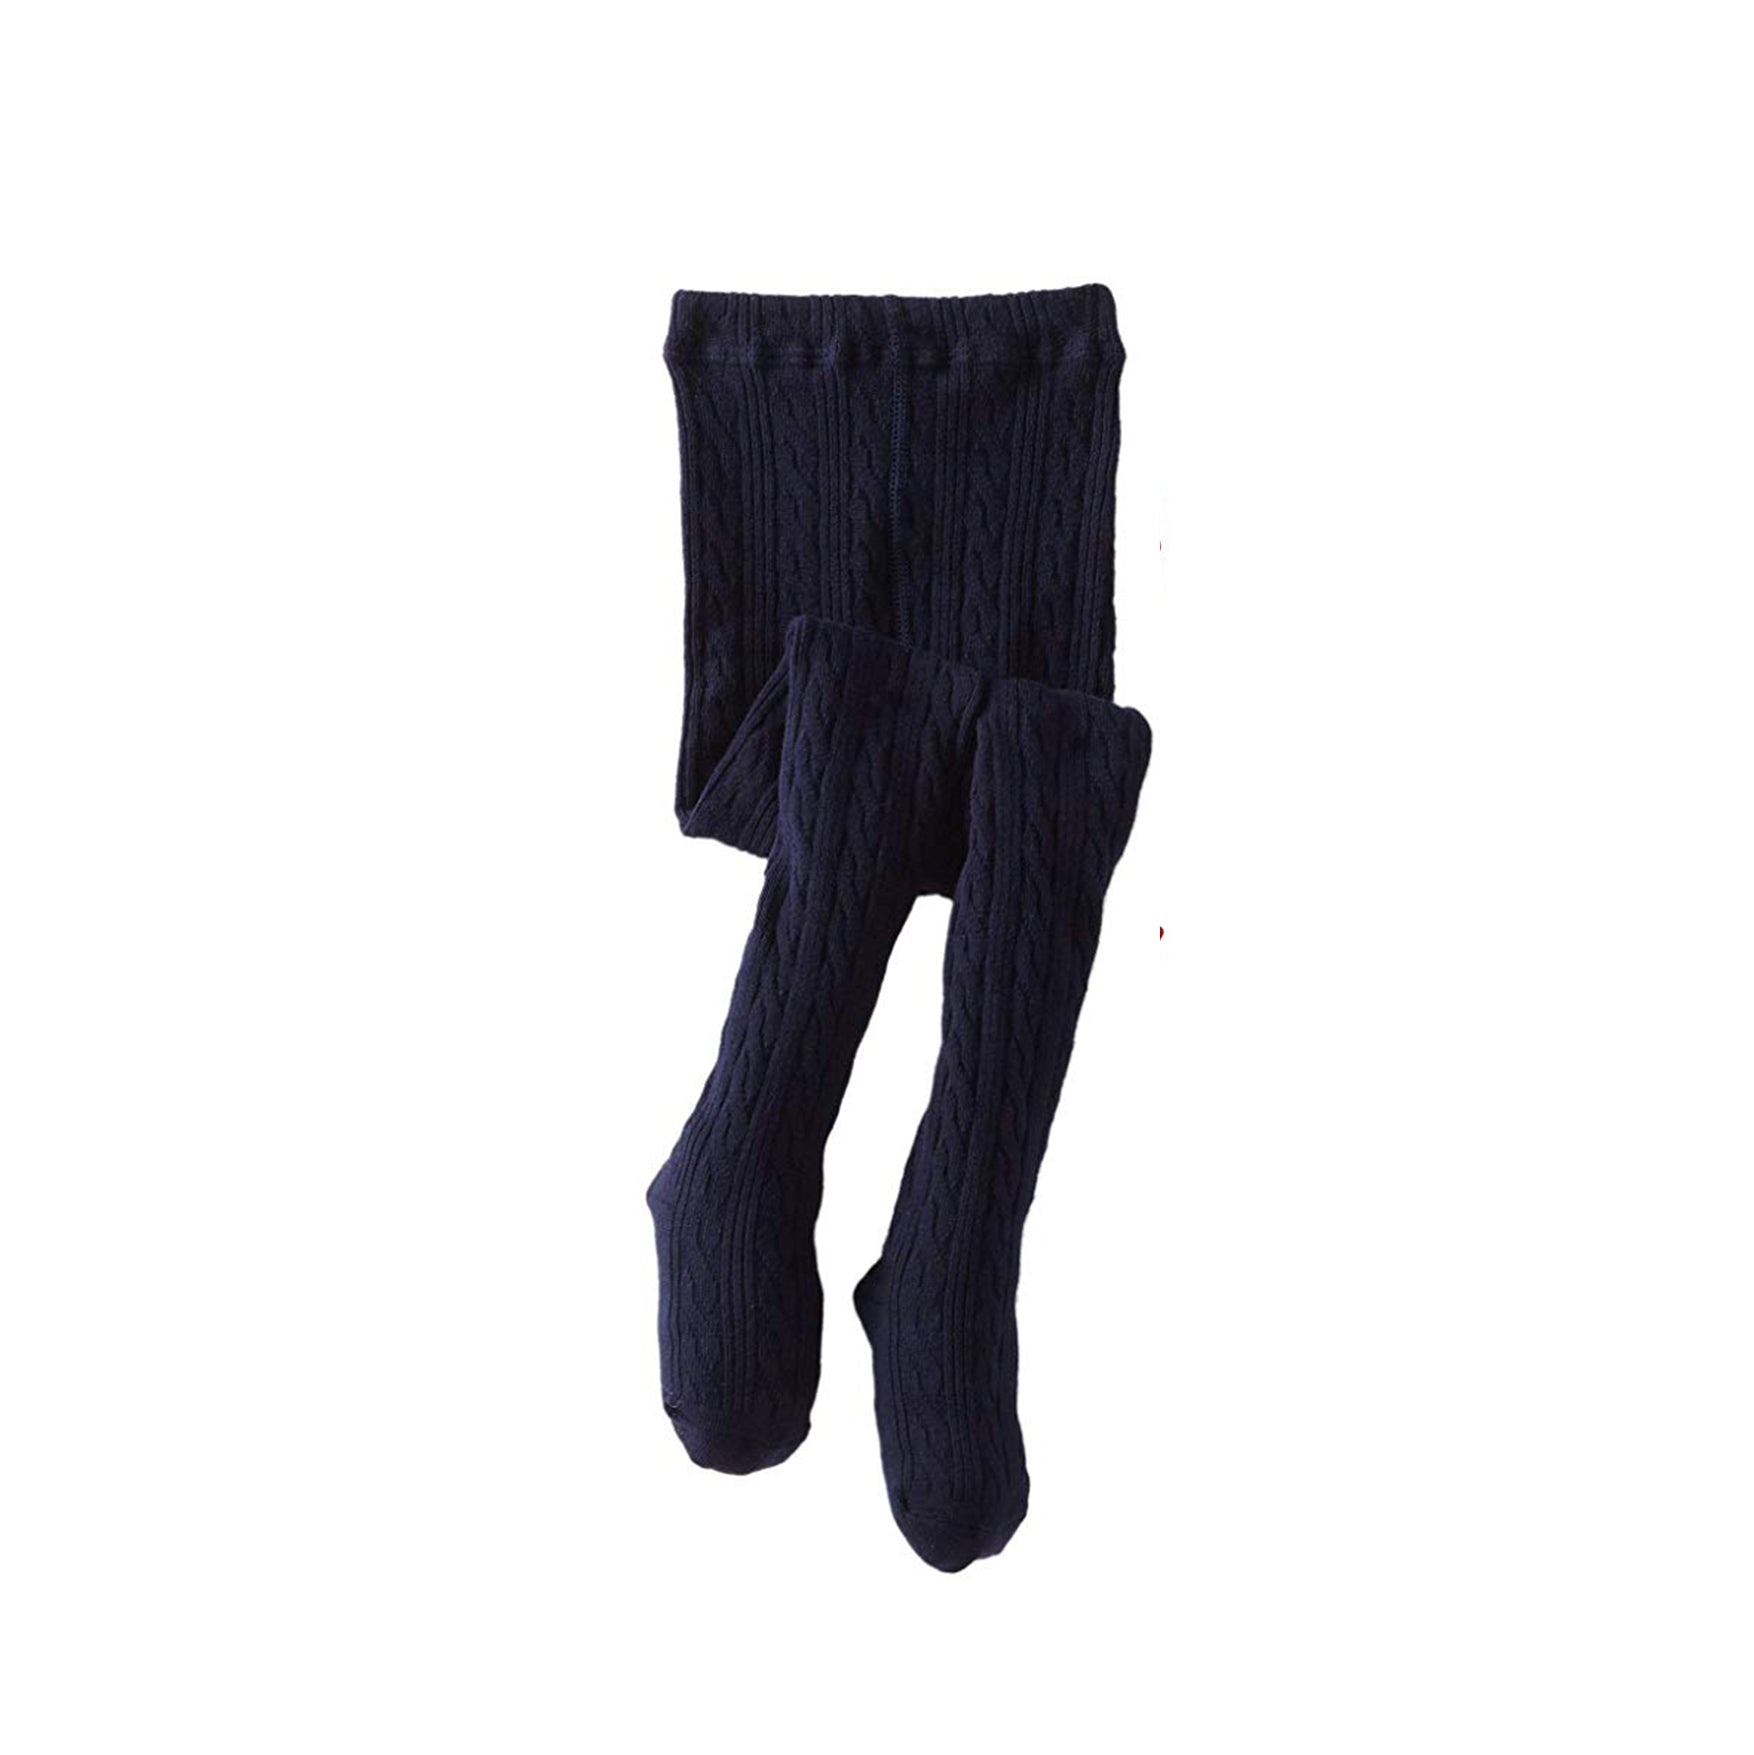 Classic Cable Knit Tights-Nautical Navy - Nantucket Kids